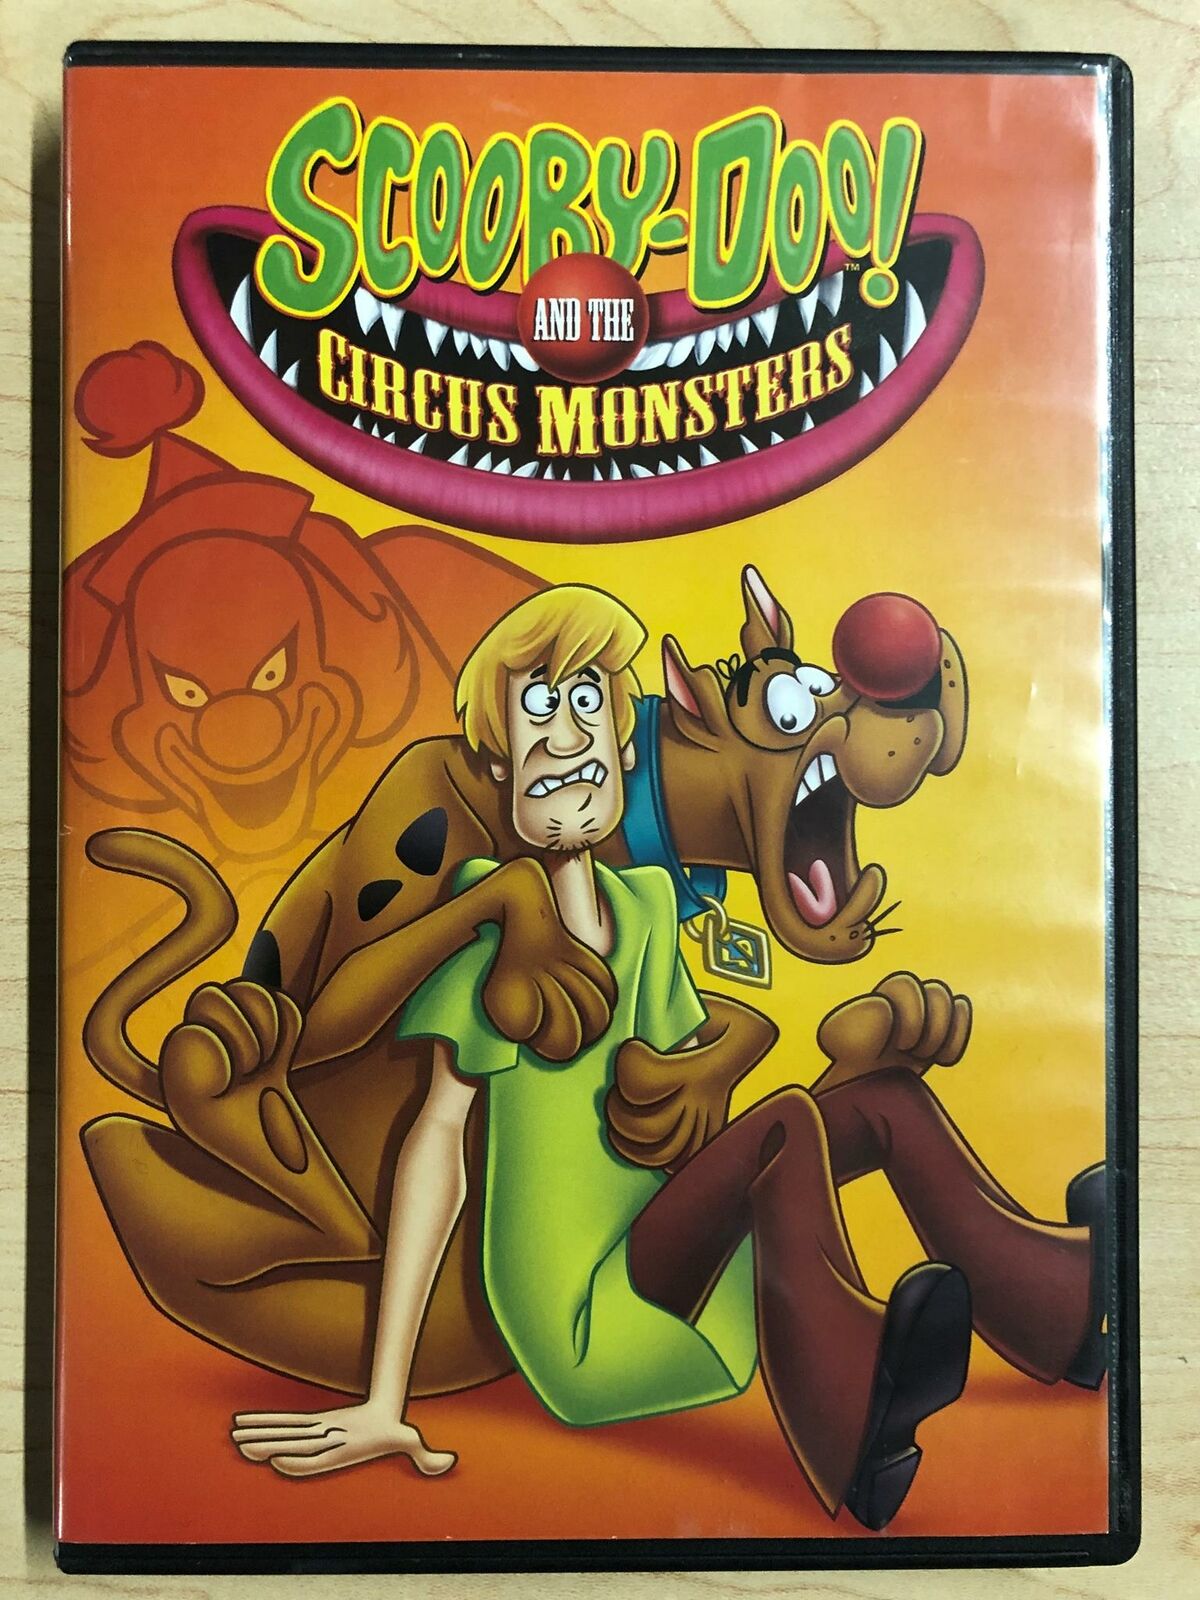 Scooby-Doo and the Circus Monsters (DVD, 3 episodes) - J1022